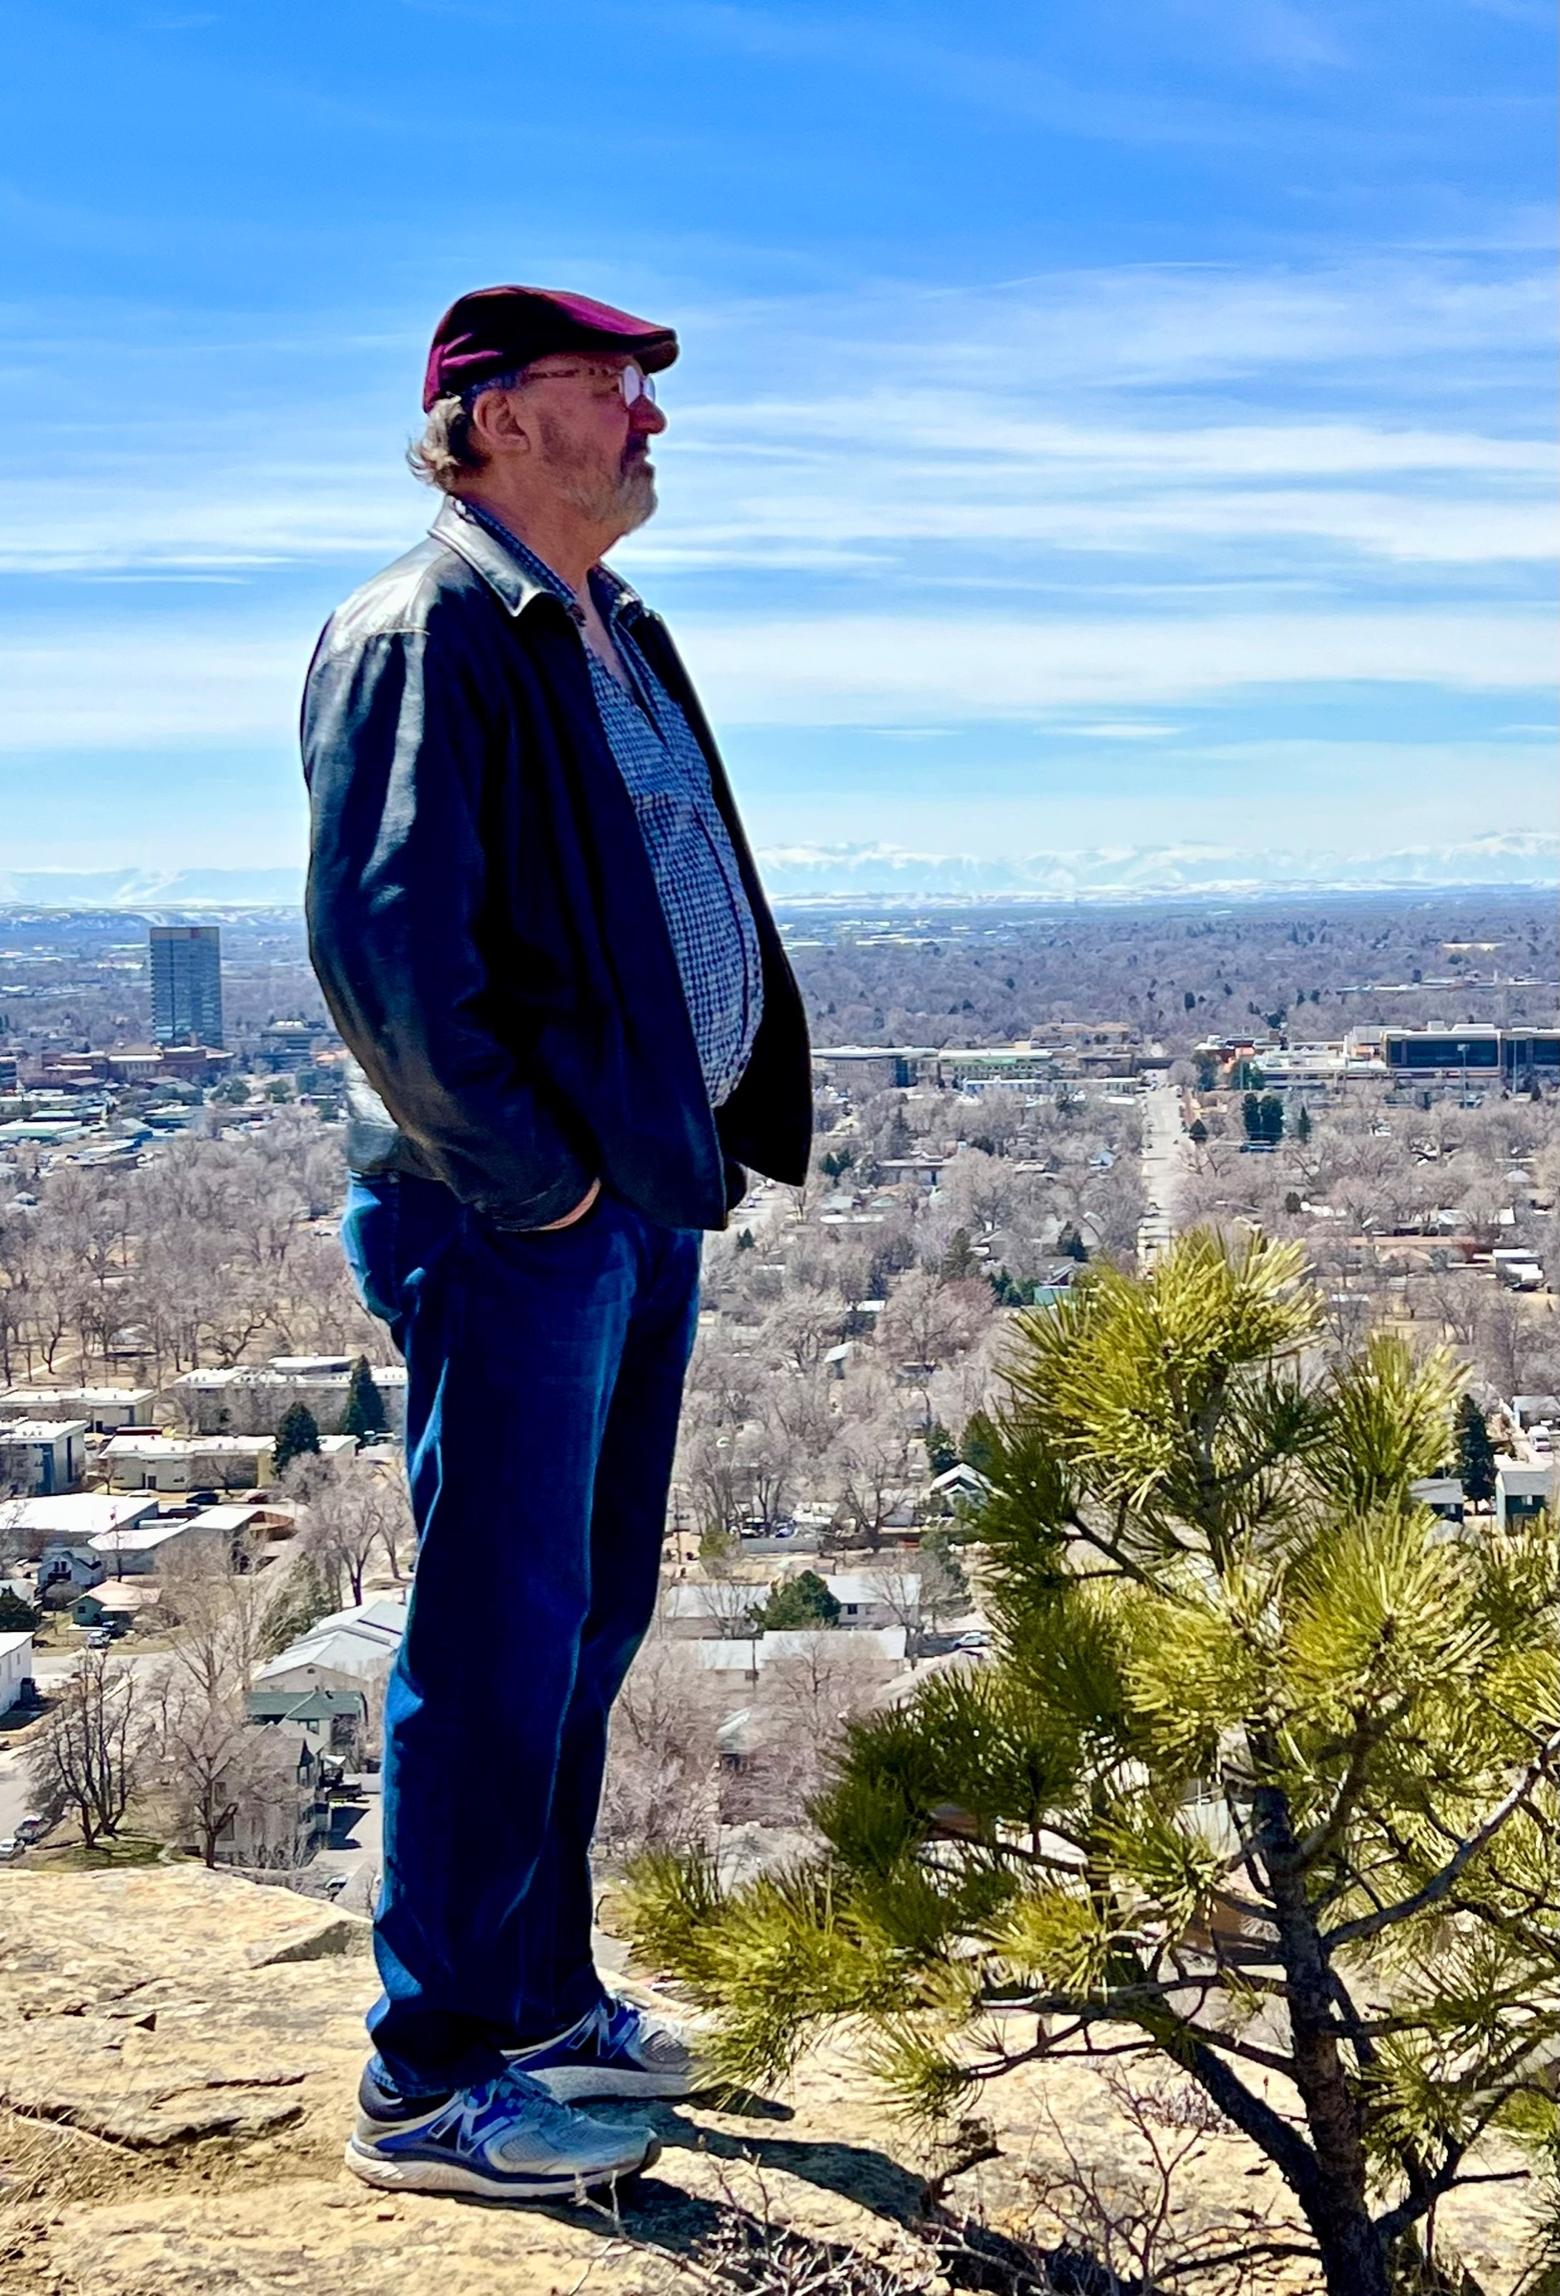 Russell Rowland stands on the famous rimrock geological formations above Billings, Montana.  Behind him in the distance are the snow-capped Absaroka-Beartooth mountains and the wild Greater Yellowstone Ecosystem. Rowland and other Billings residents feel a strong connection not only toward the Yellowstone region, but the state's prairies of true big skies, broken eroded landforms and hardscrabble people who need to be tough to persevere. They're a different breed from the funhog culture found in Bozeman and Big Sky. 